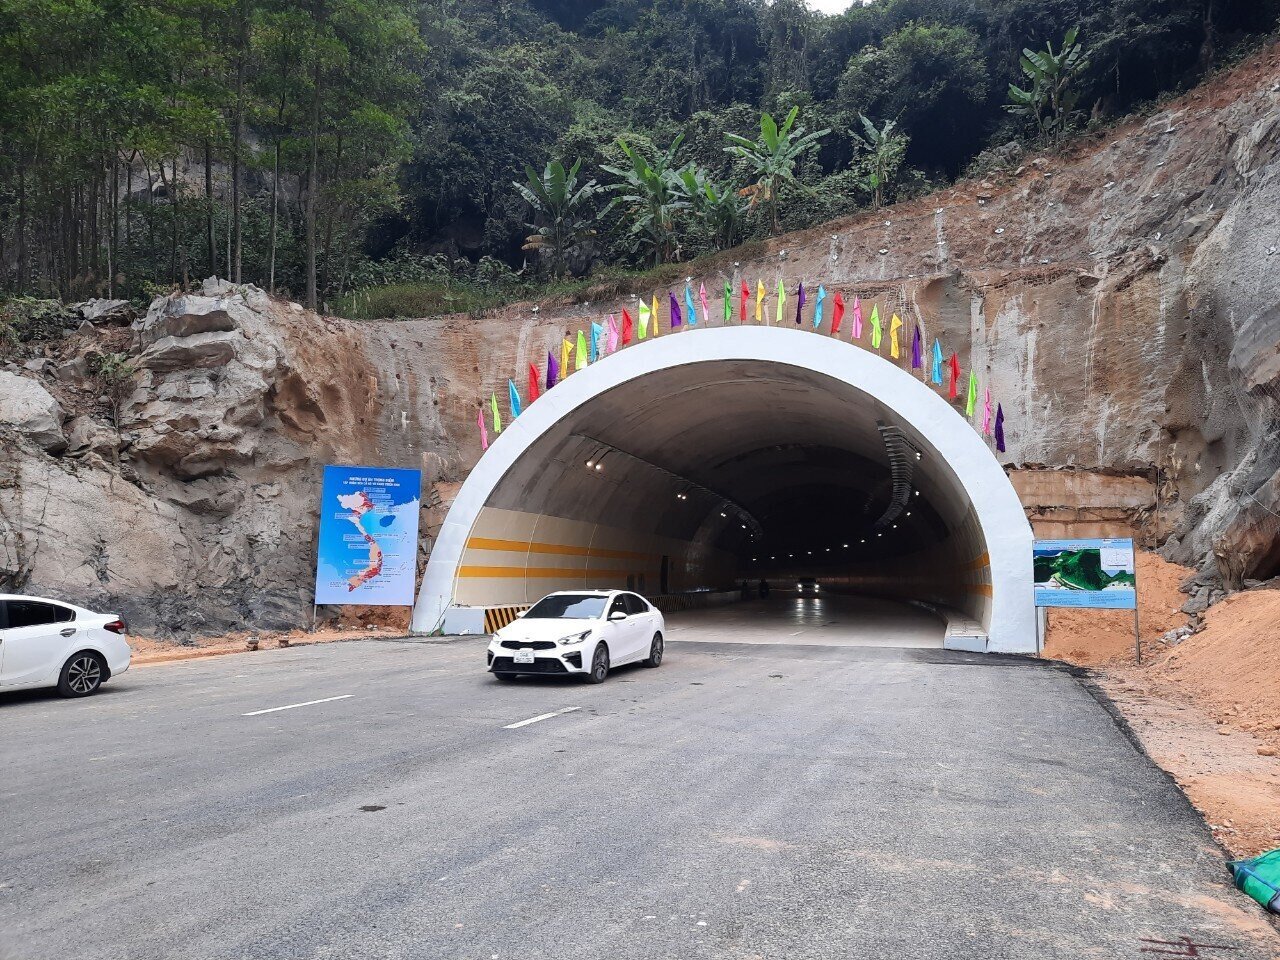 coastal road, ha long bay, seabound route, special point, starting construction, tran quoc nghien, world natural heritage, the route “most beautiful in vietnam” has caused a fever recently: only 2 hours drive from hanoi!